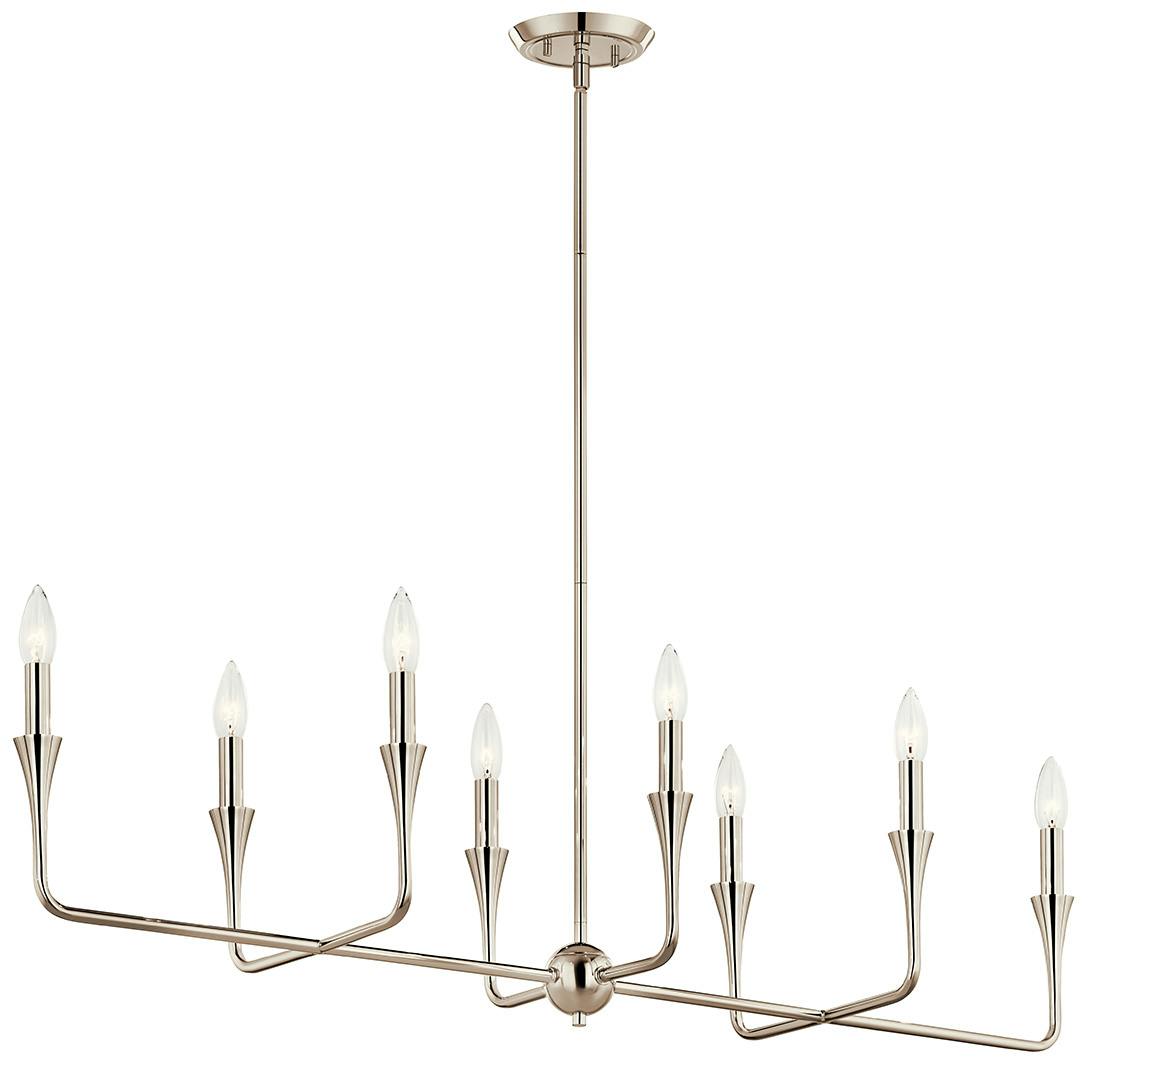 The Alvaro 45.5 Inch 8 Light Linear Chandelier in Polished Nickel on a white background